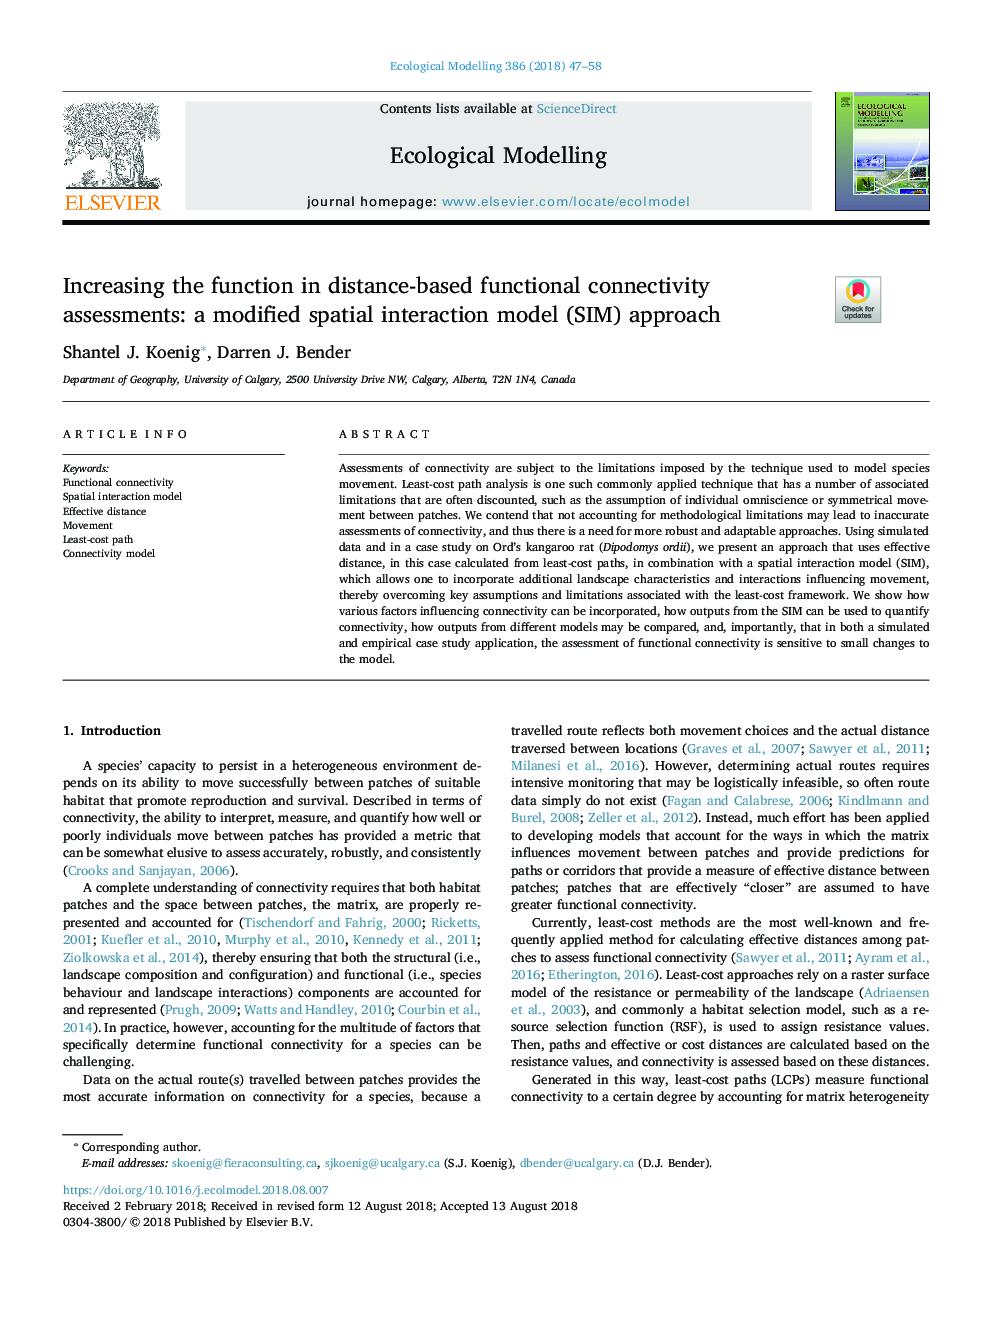 Increasing the function in distance-based functional connectivity assessments: a modified spatial interaction model (SIM) approach